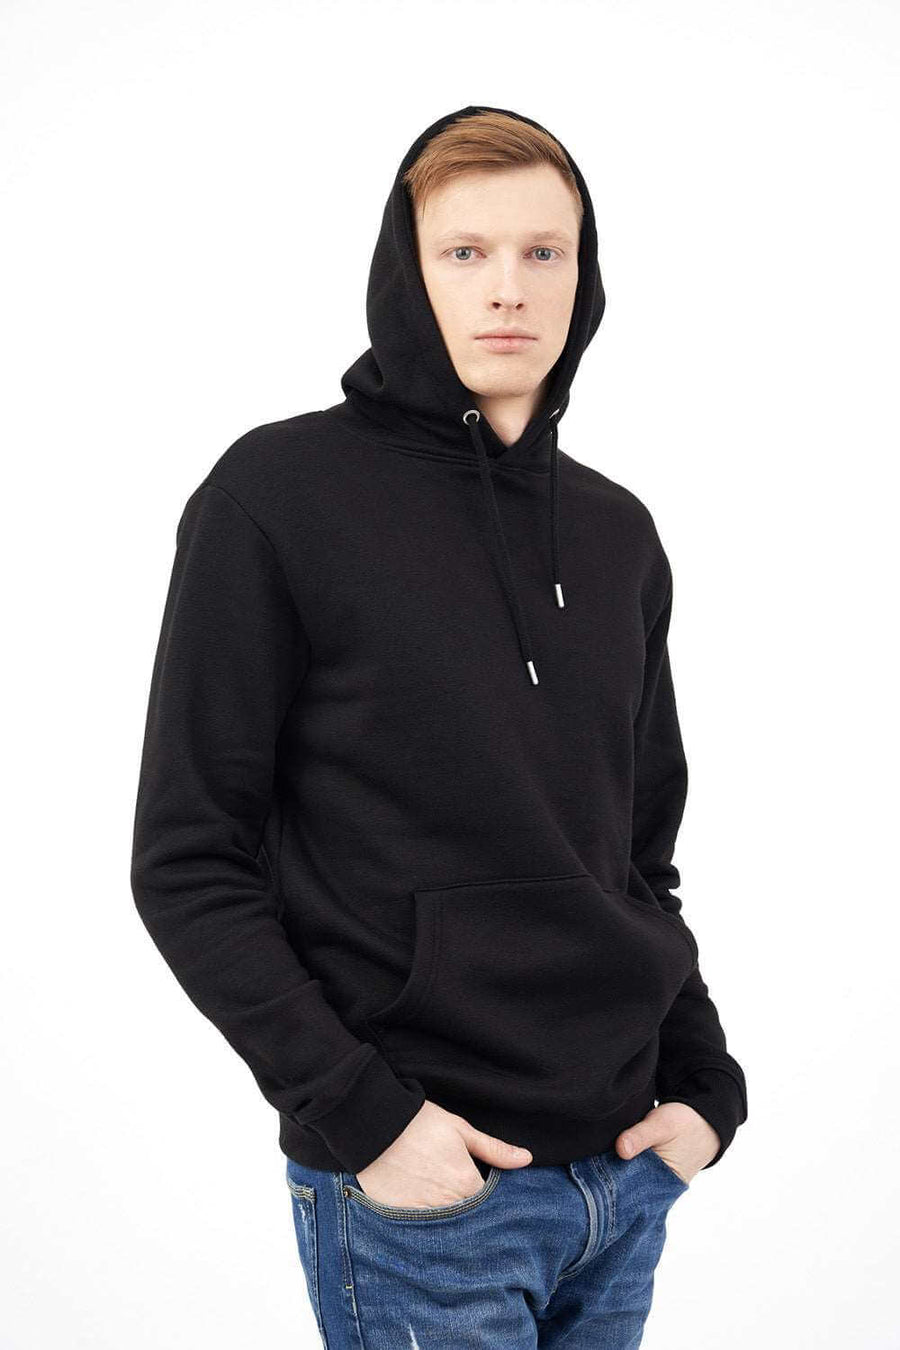 Right Side Pose of Men's Hoodie for Everyday Living with Kangaroo Pockets